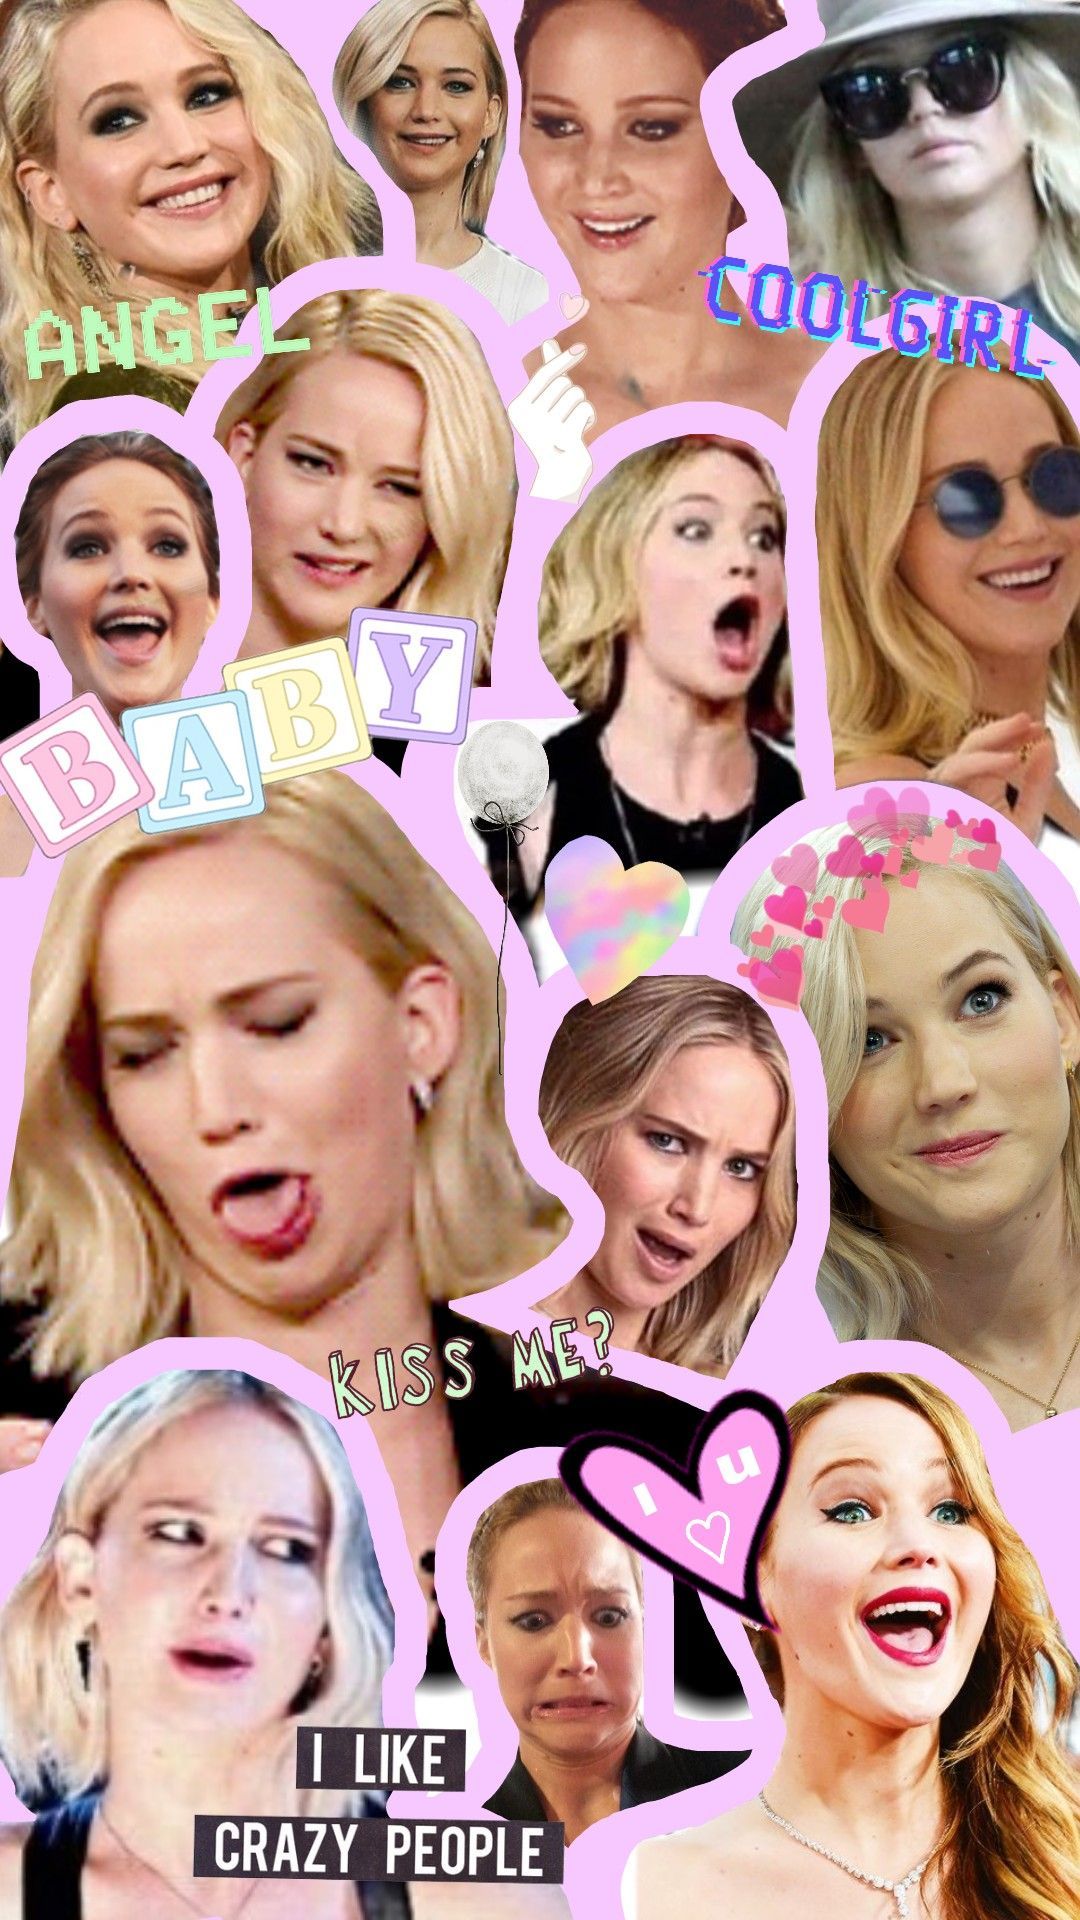 A collection of Jennifer Lawrence's funniest moments captured in one place. From her iconic 'I like crazy people' quote to her famous 'baby' moment, this wallpaper is sure to bring a smile to your face. With 15 tags to describe this image, you can easily categorize it for easy access. - Jennifer Lawrence